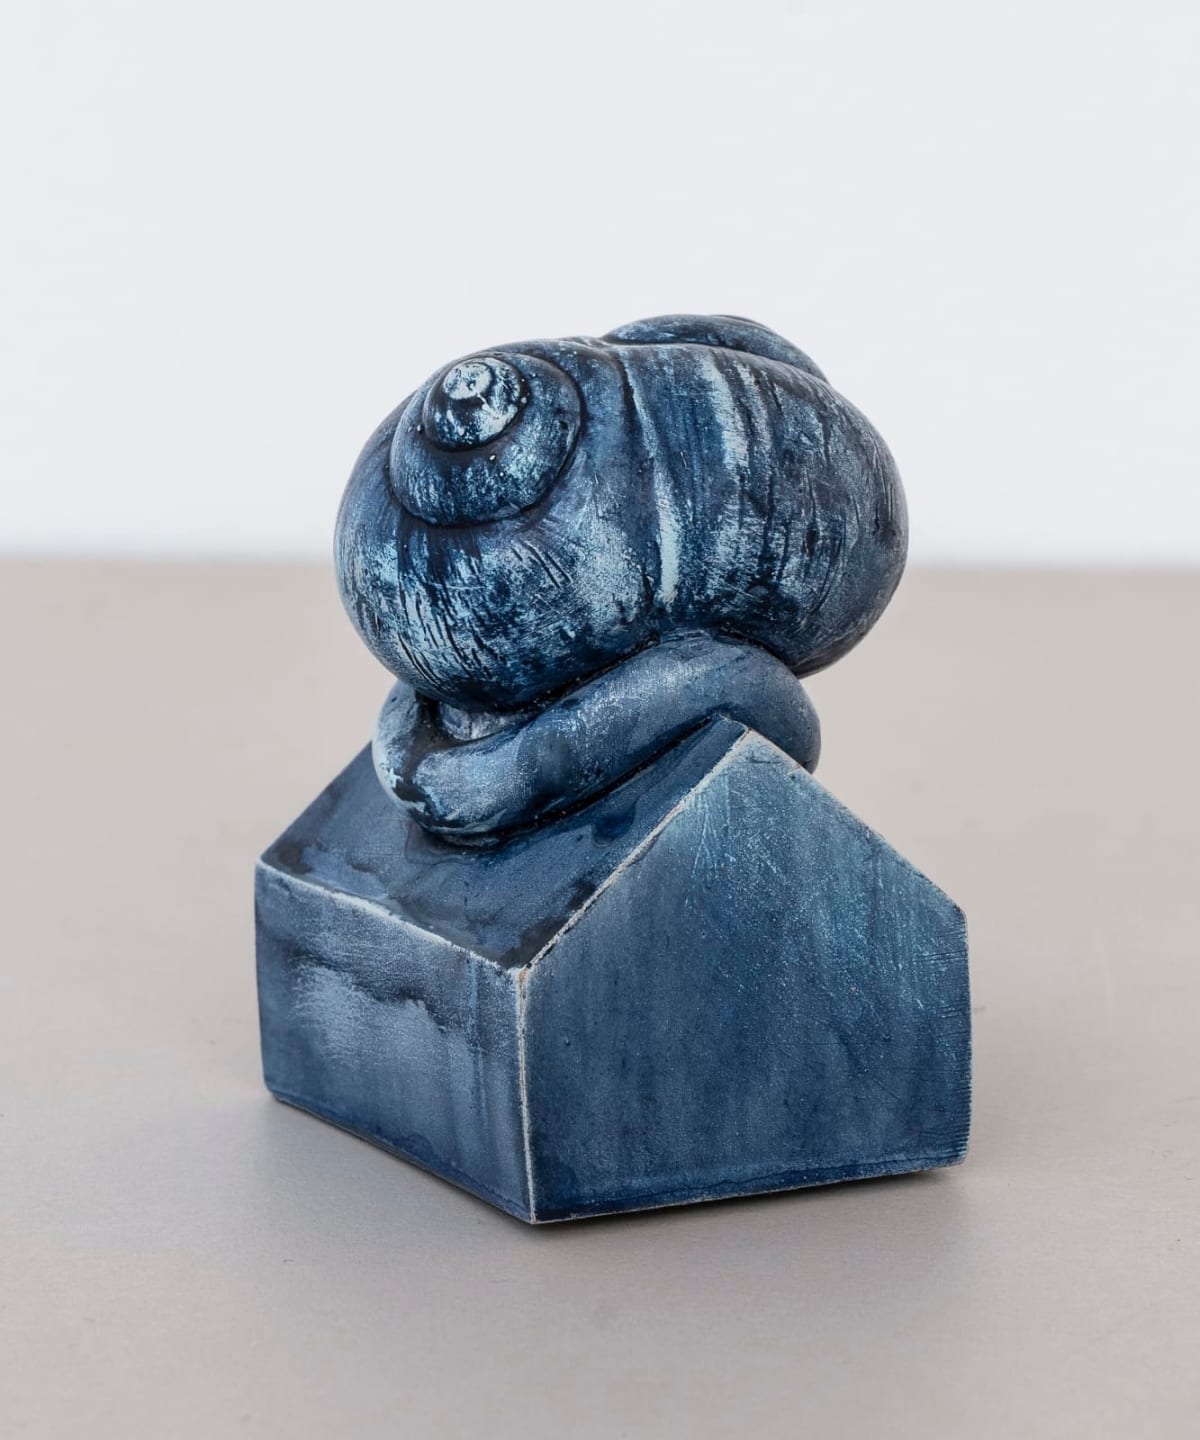 Alison Wilding RA On the Roof, 2019 Bronze 5 x 4.2 x 7 cm 2 x 1 5/8 x 2 3/4 in Edition 1 of 5